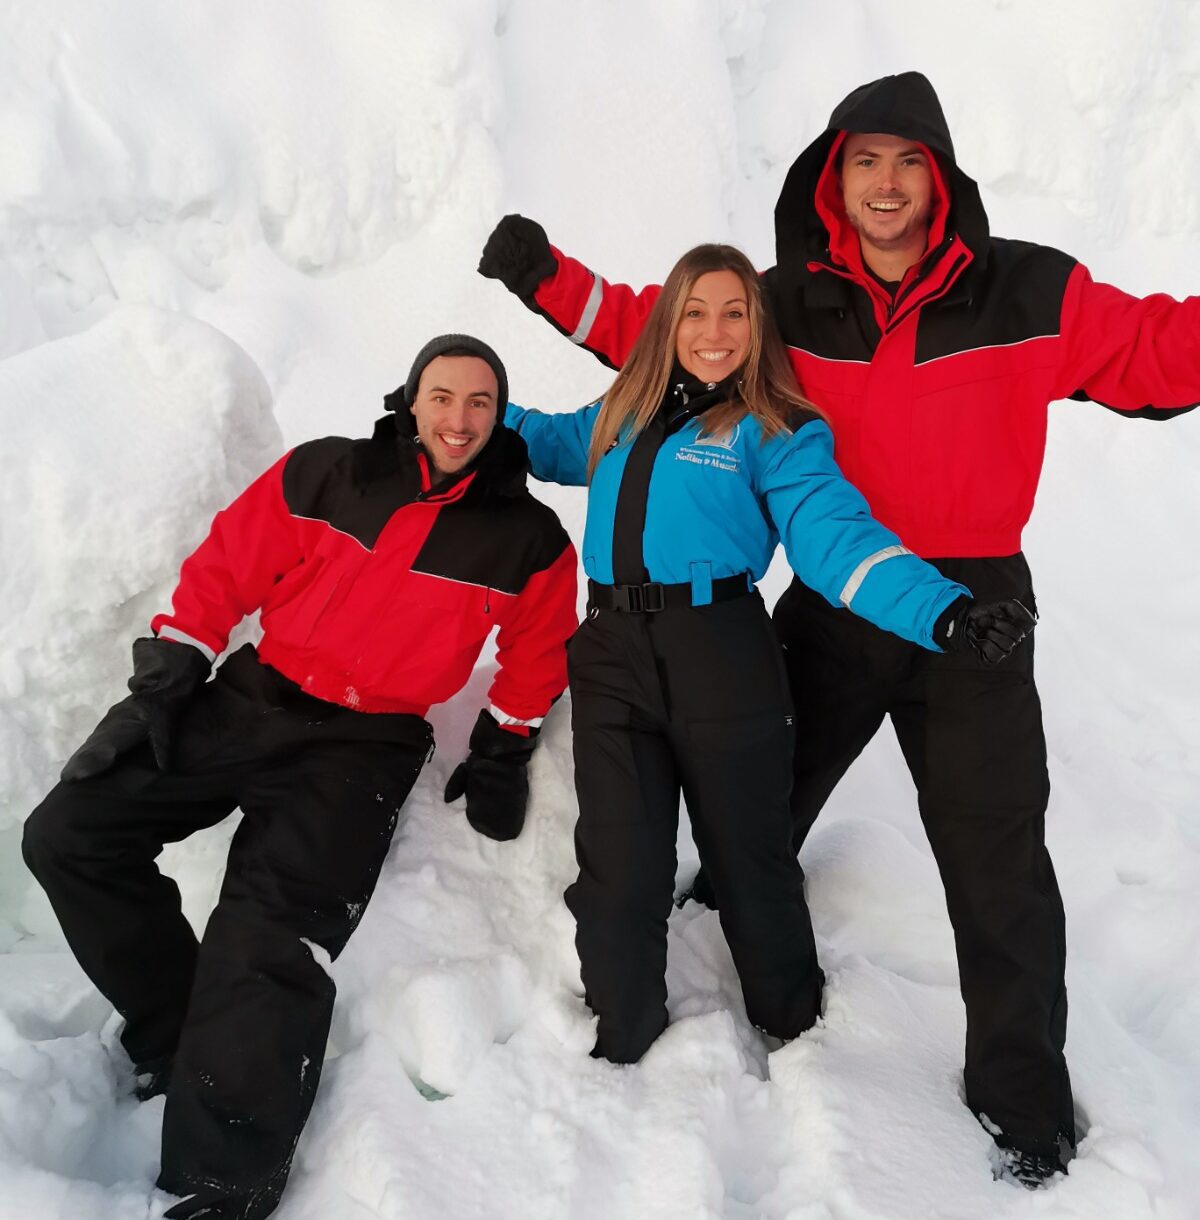 3 of HEL's angels in the snow for a product experience